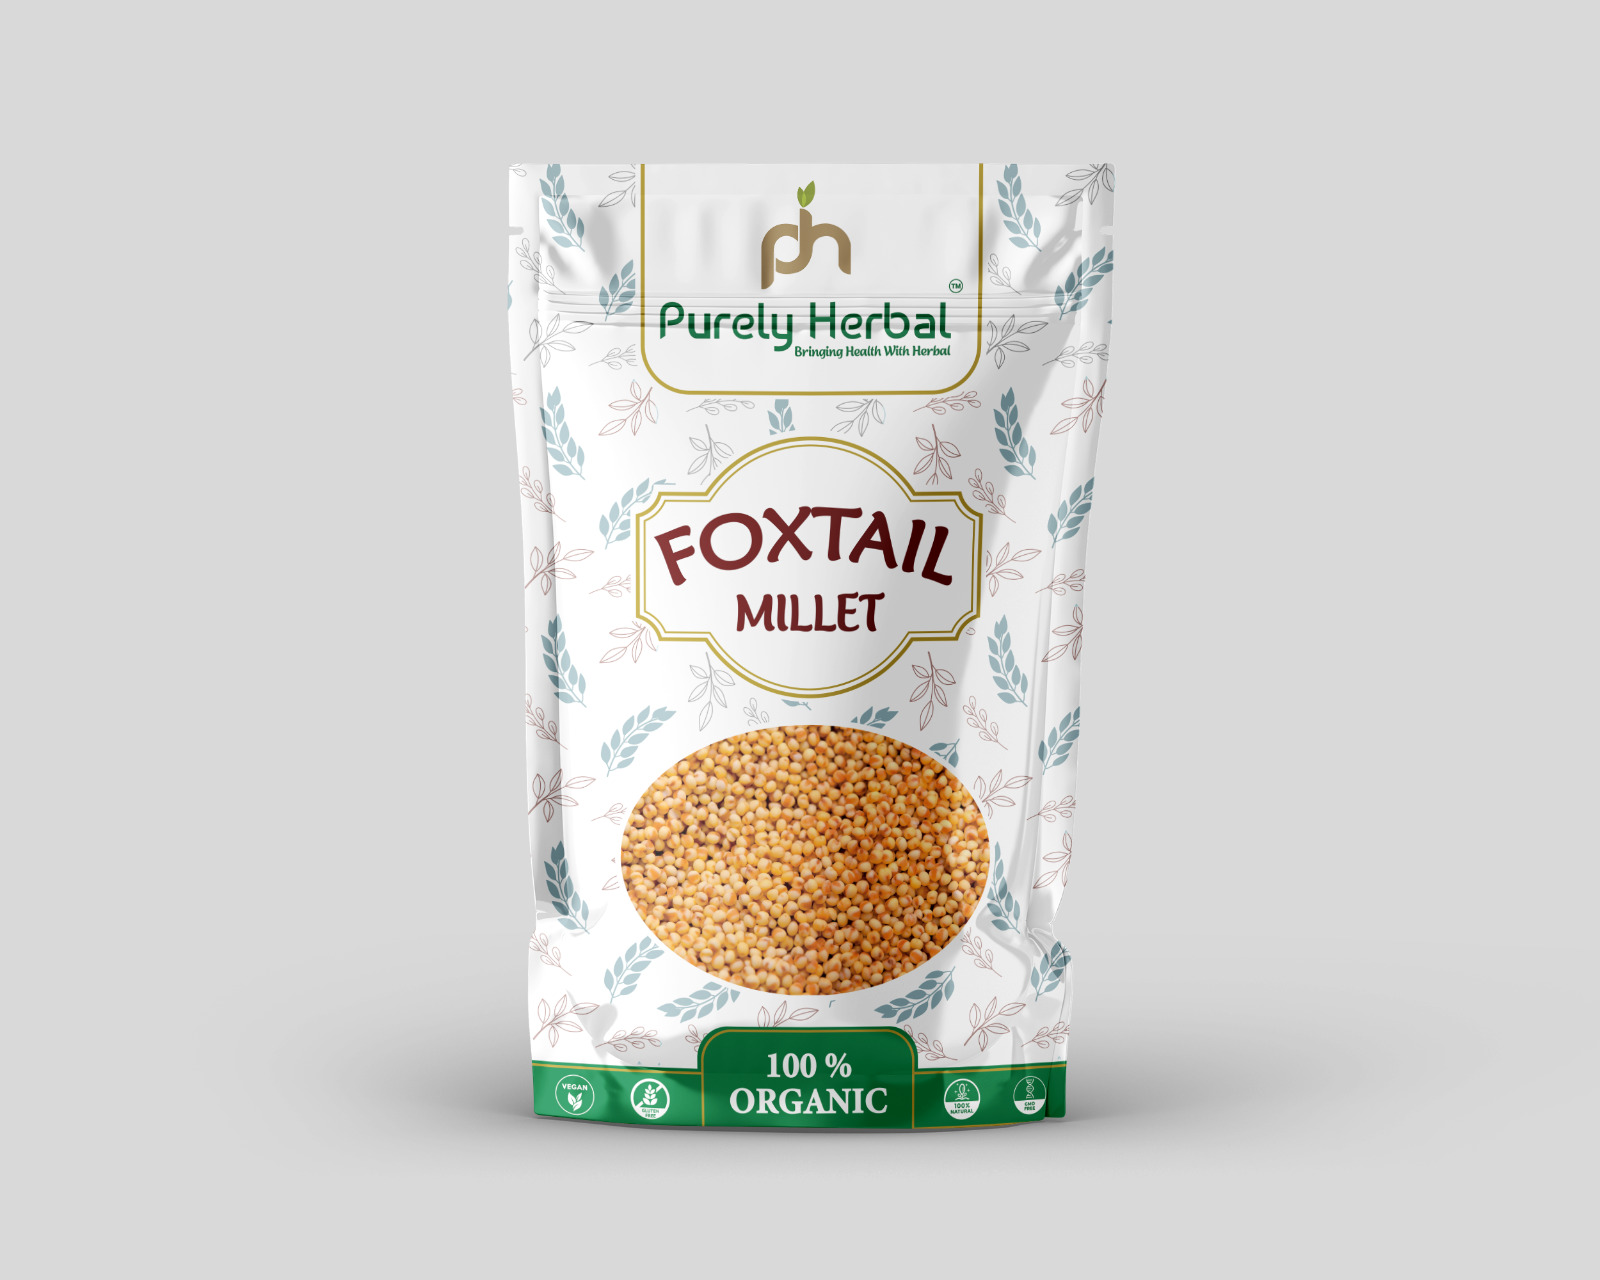 Purely Herbal Foxtail Millet